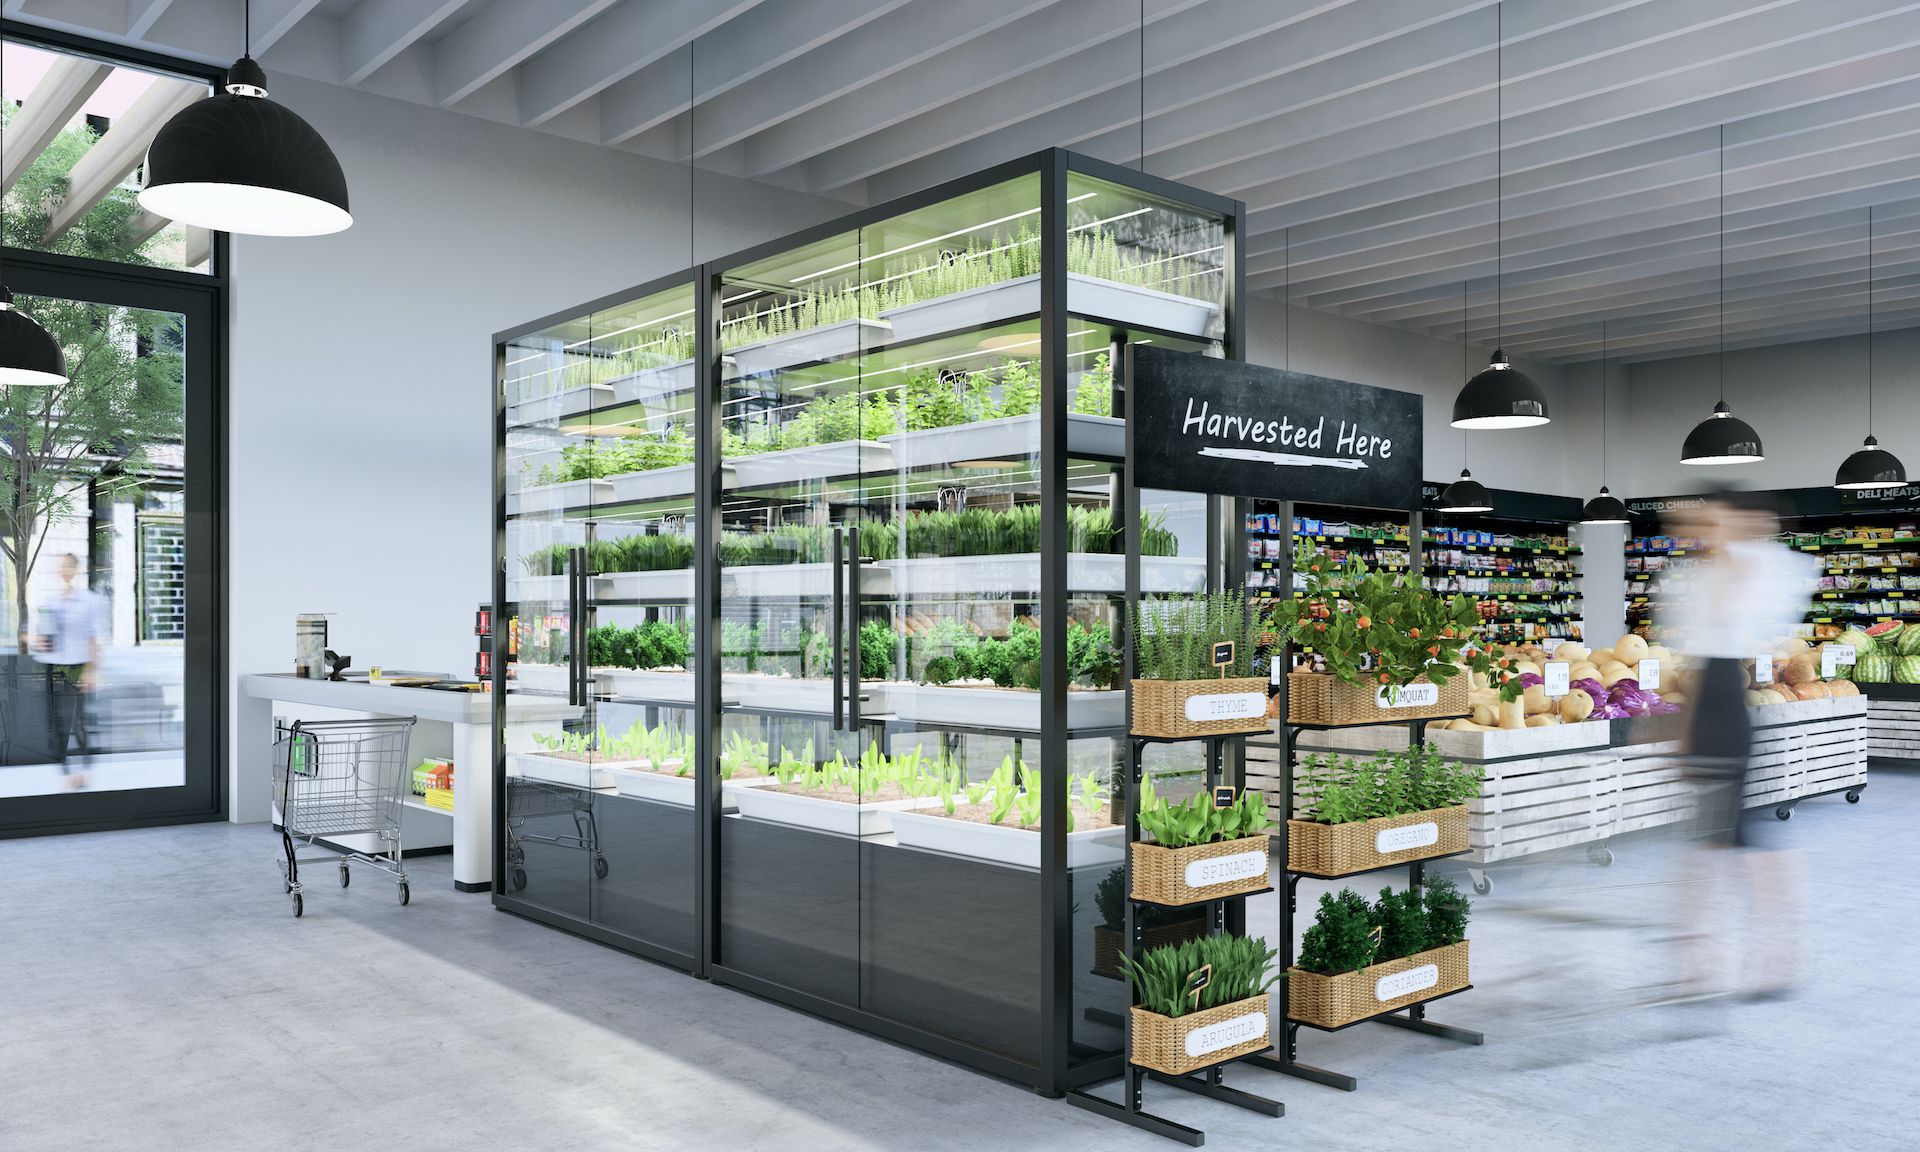 2021 Top Article - How Vertical Farming will shape the Post Pandemic Food Supply Chain